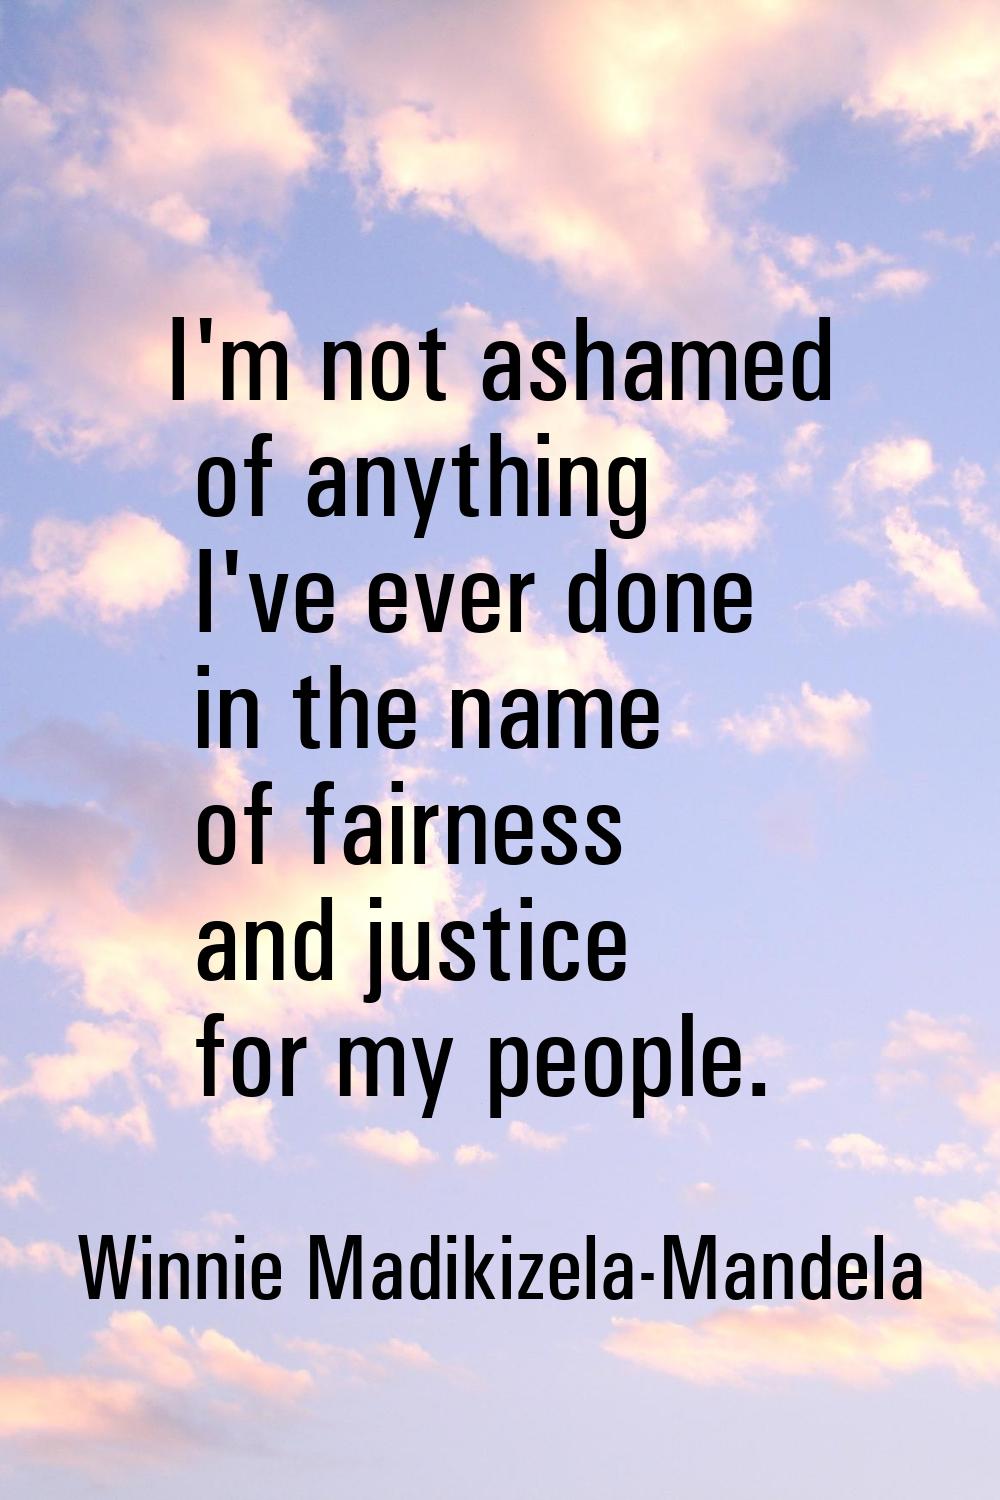 I'm not ashamed of anything I've ever done in the name of fairness and justice for my people.